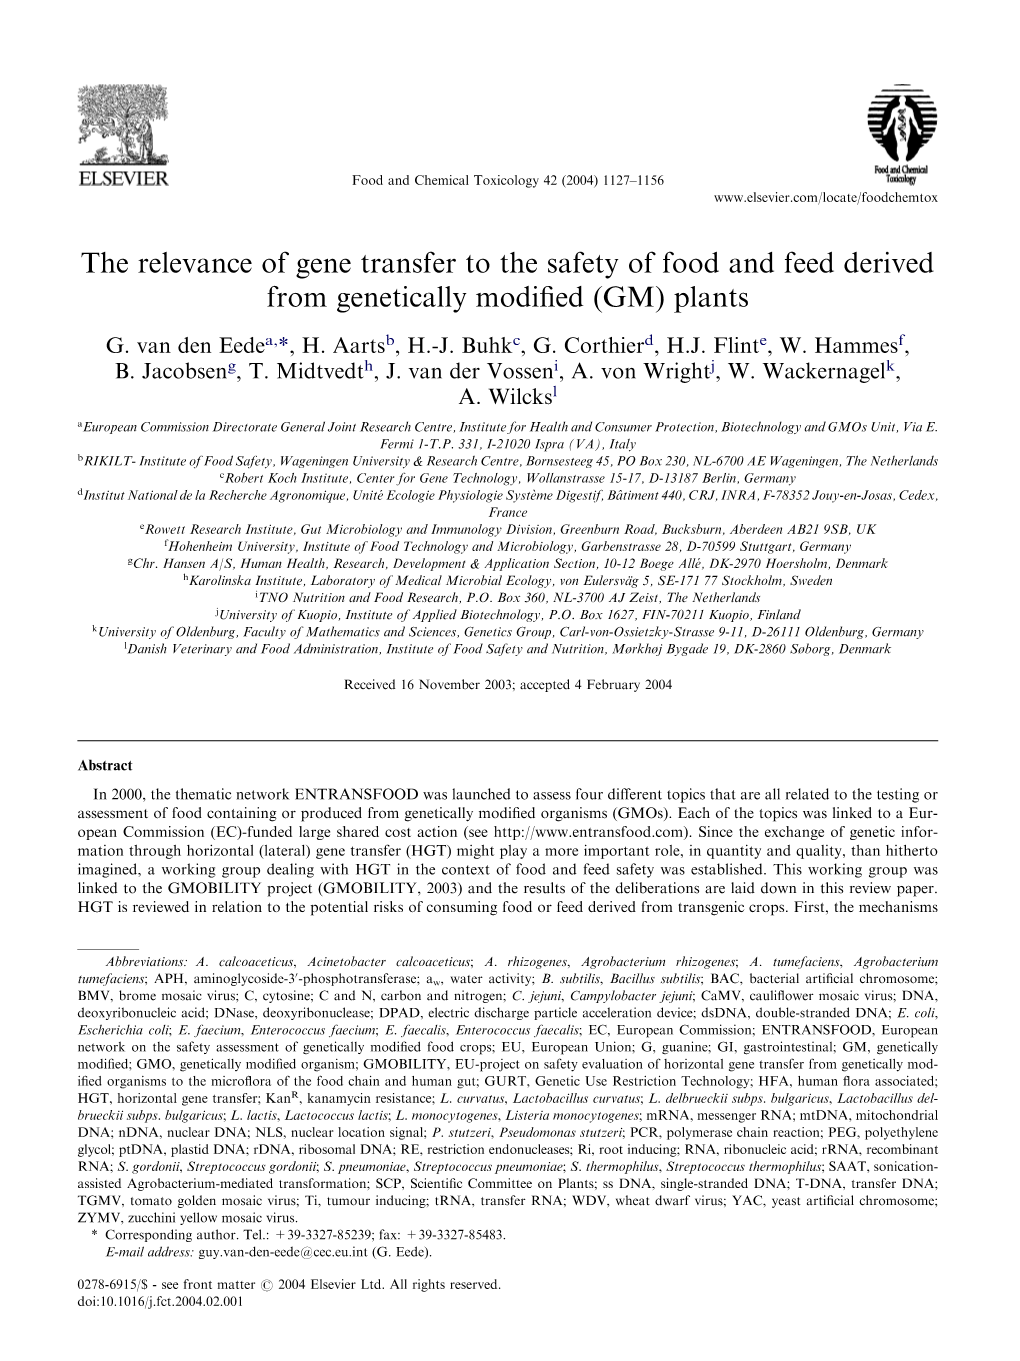 The Relevance of Gene Transfer to the Safety of Food and Feed Derived from Genetically Modified (GM) Plants